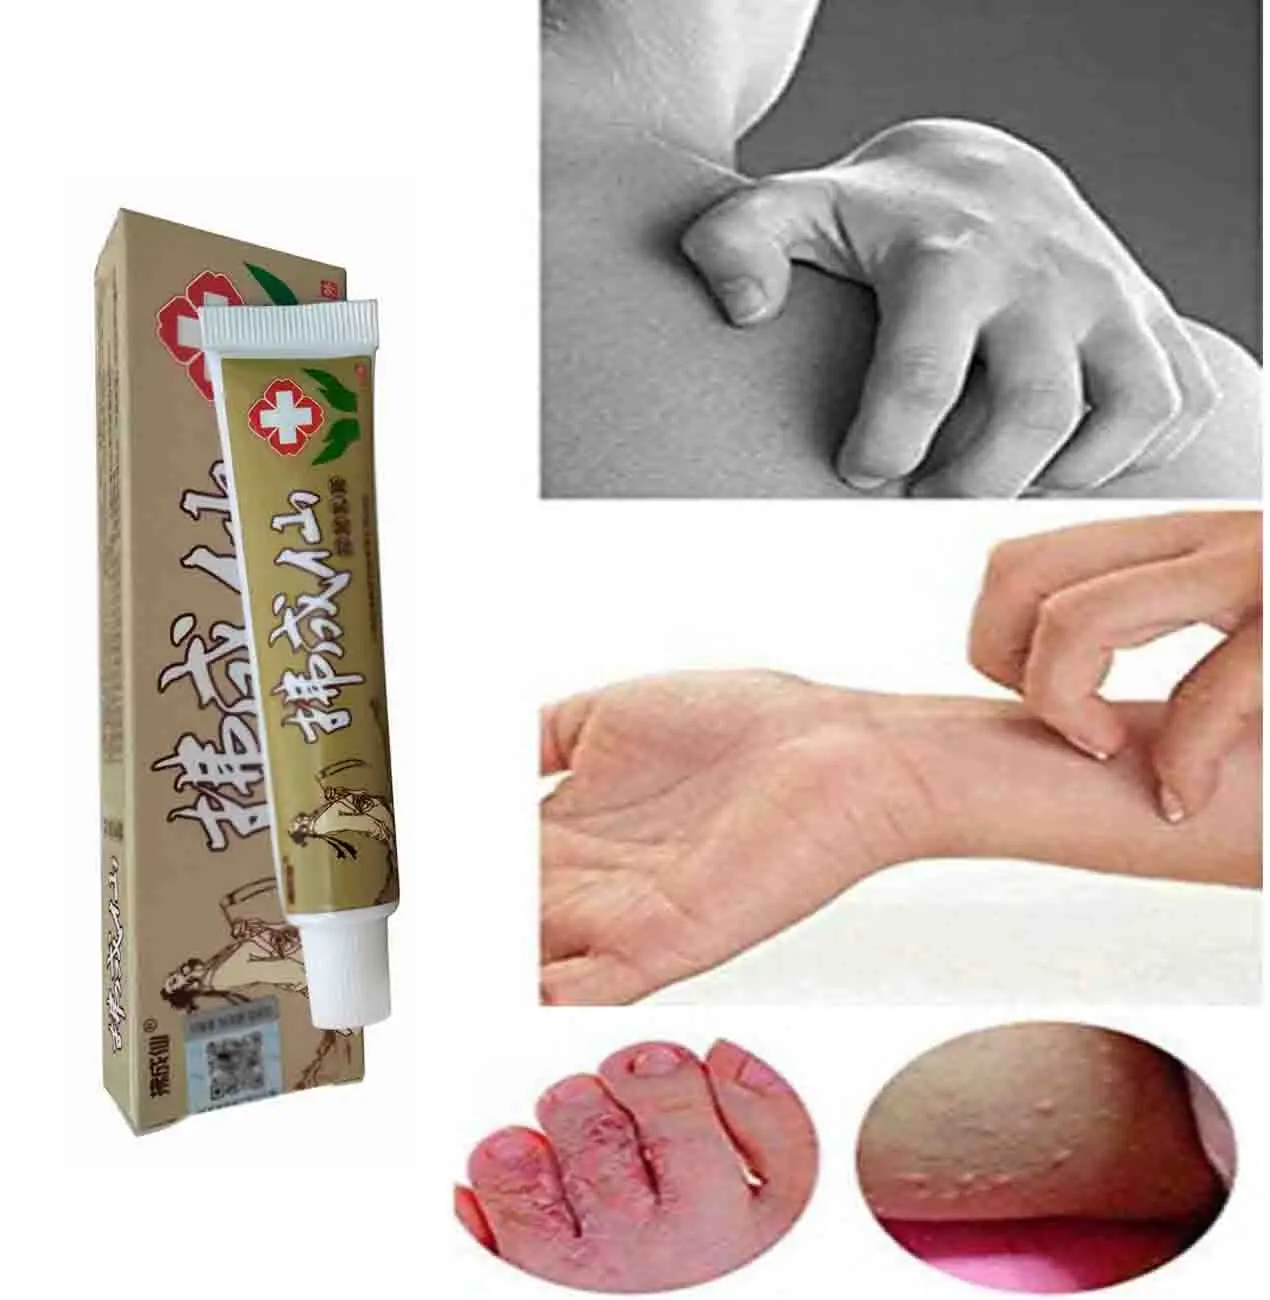 

Treatment Psoriasis Ointment Natural Chinese Herbal Eczema, Creams Dermatitis Pruritus Anti-Itch External Use FCX